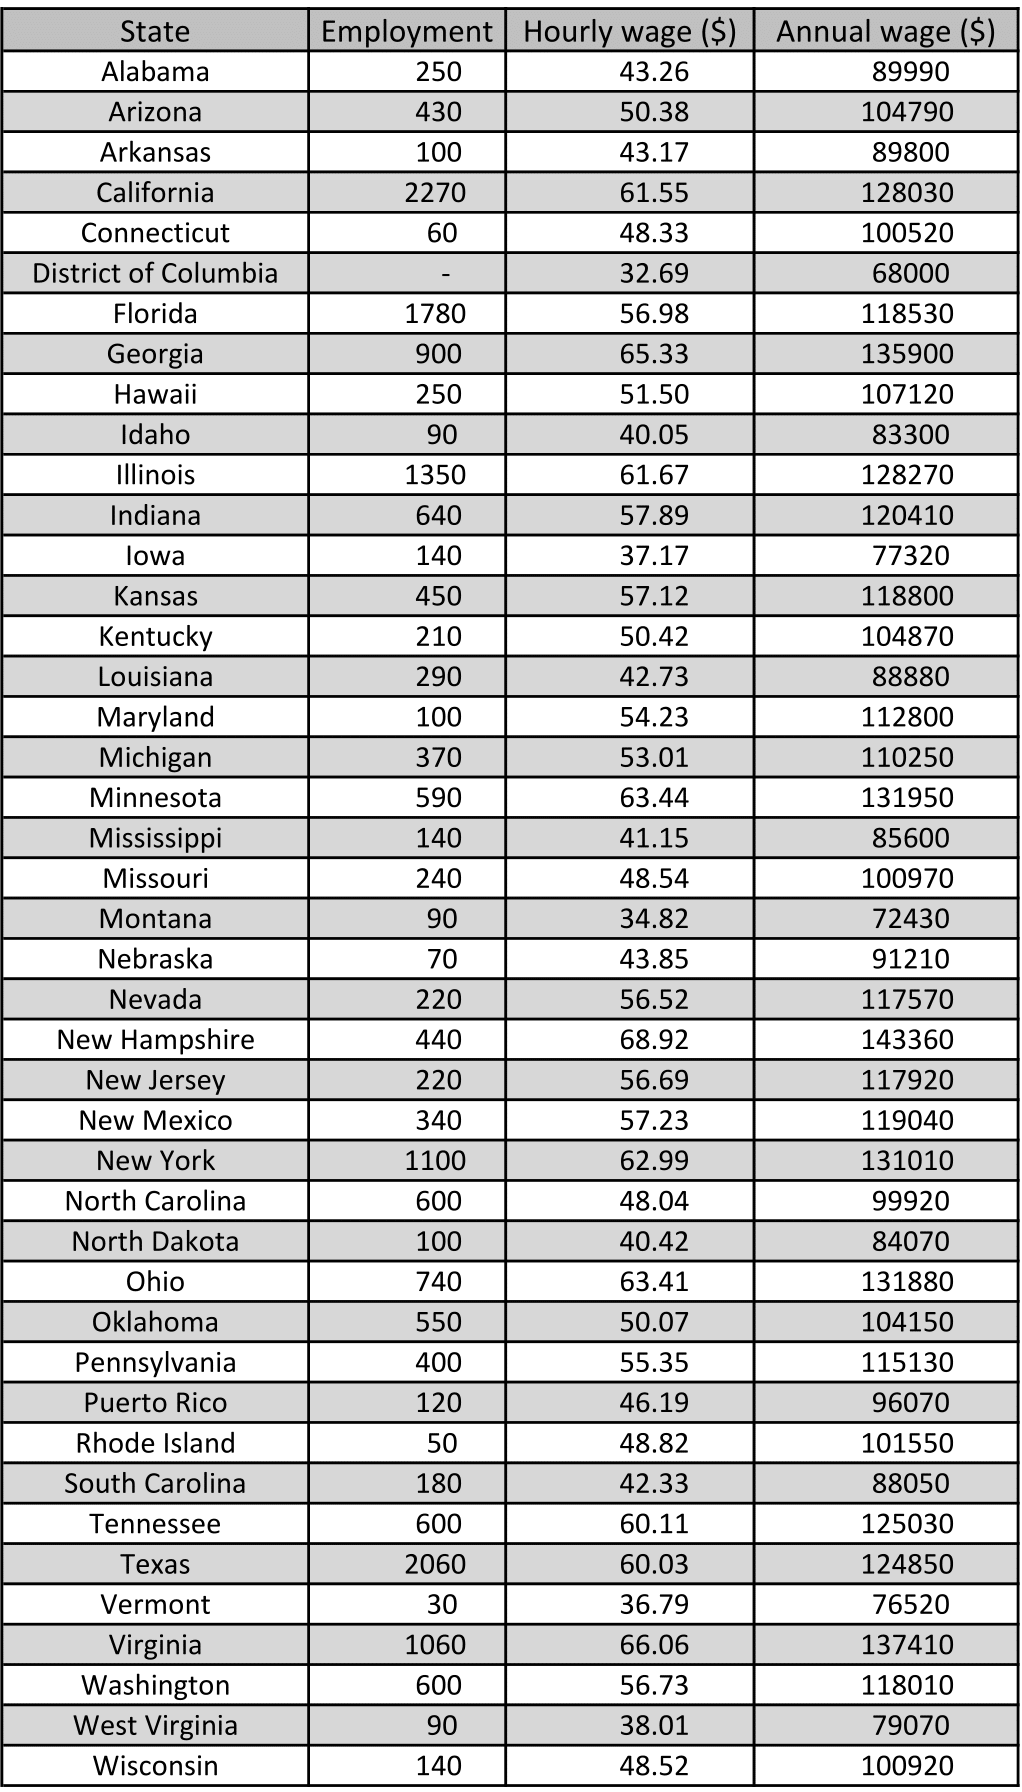 Air Traffic Controllers average hourly salary for all 50 states — N.H. tops the list at $64k